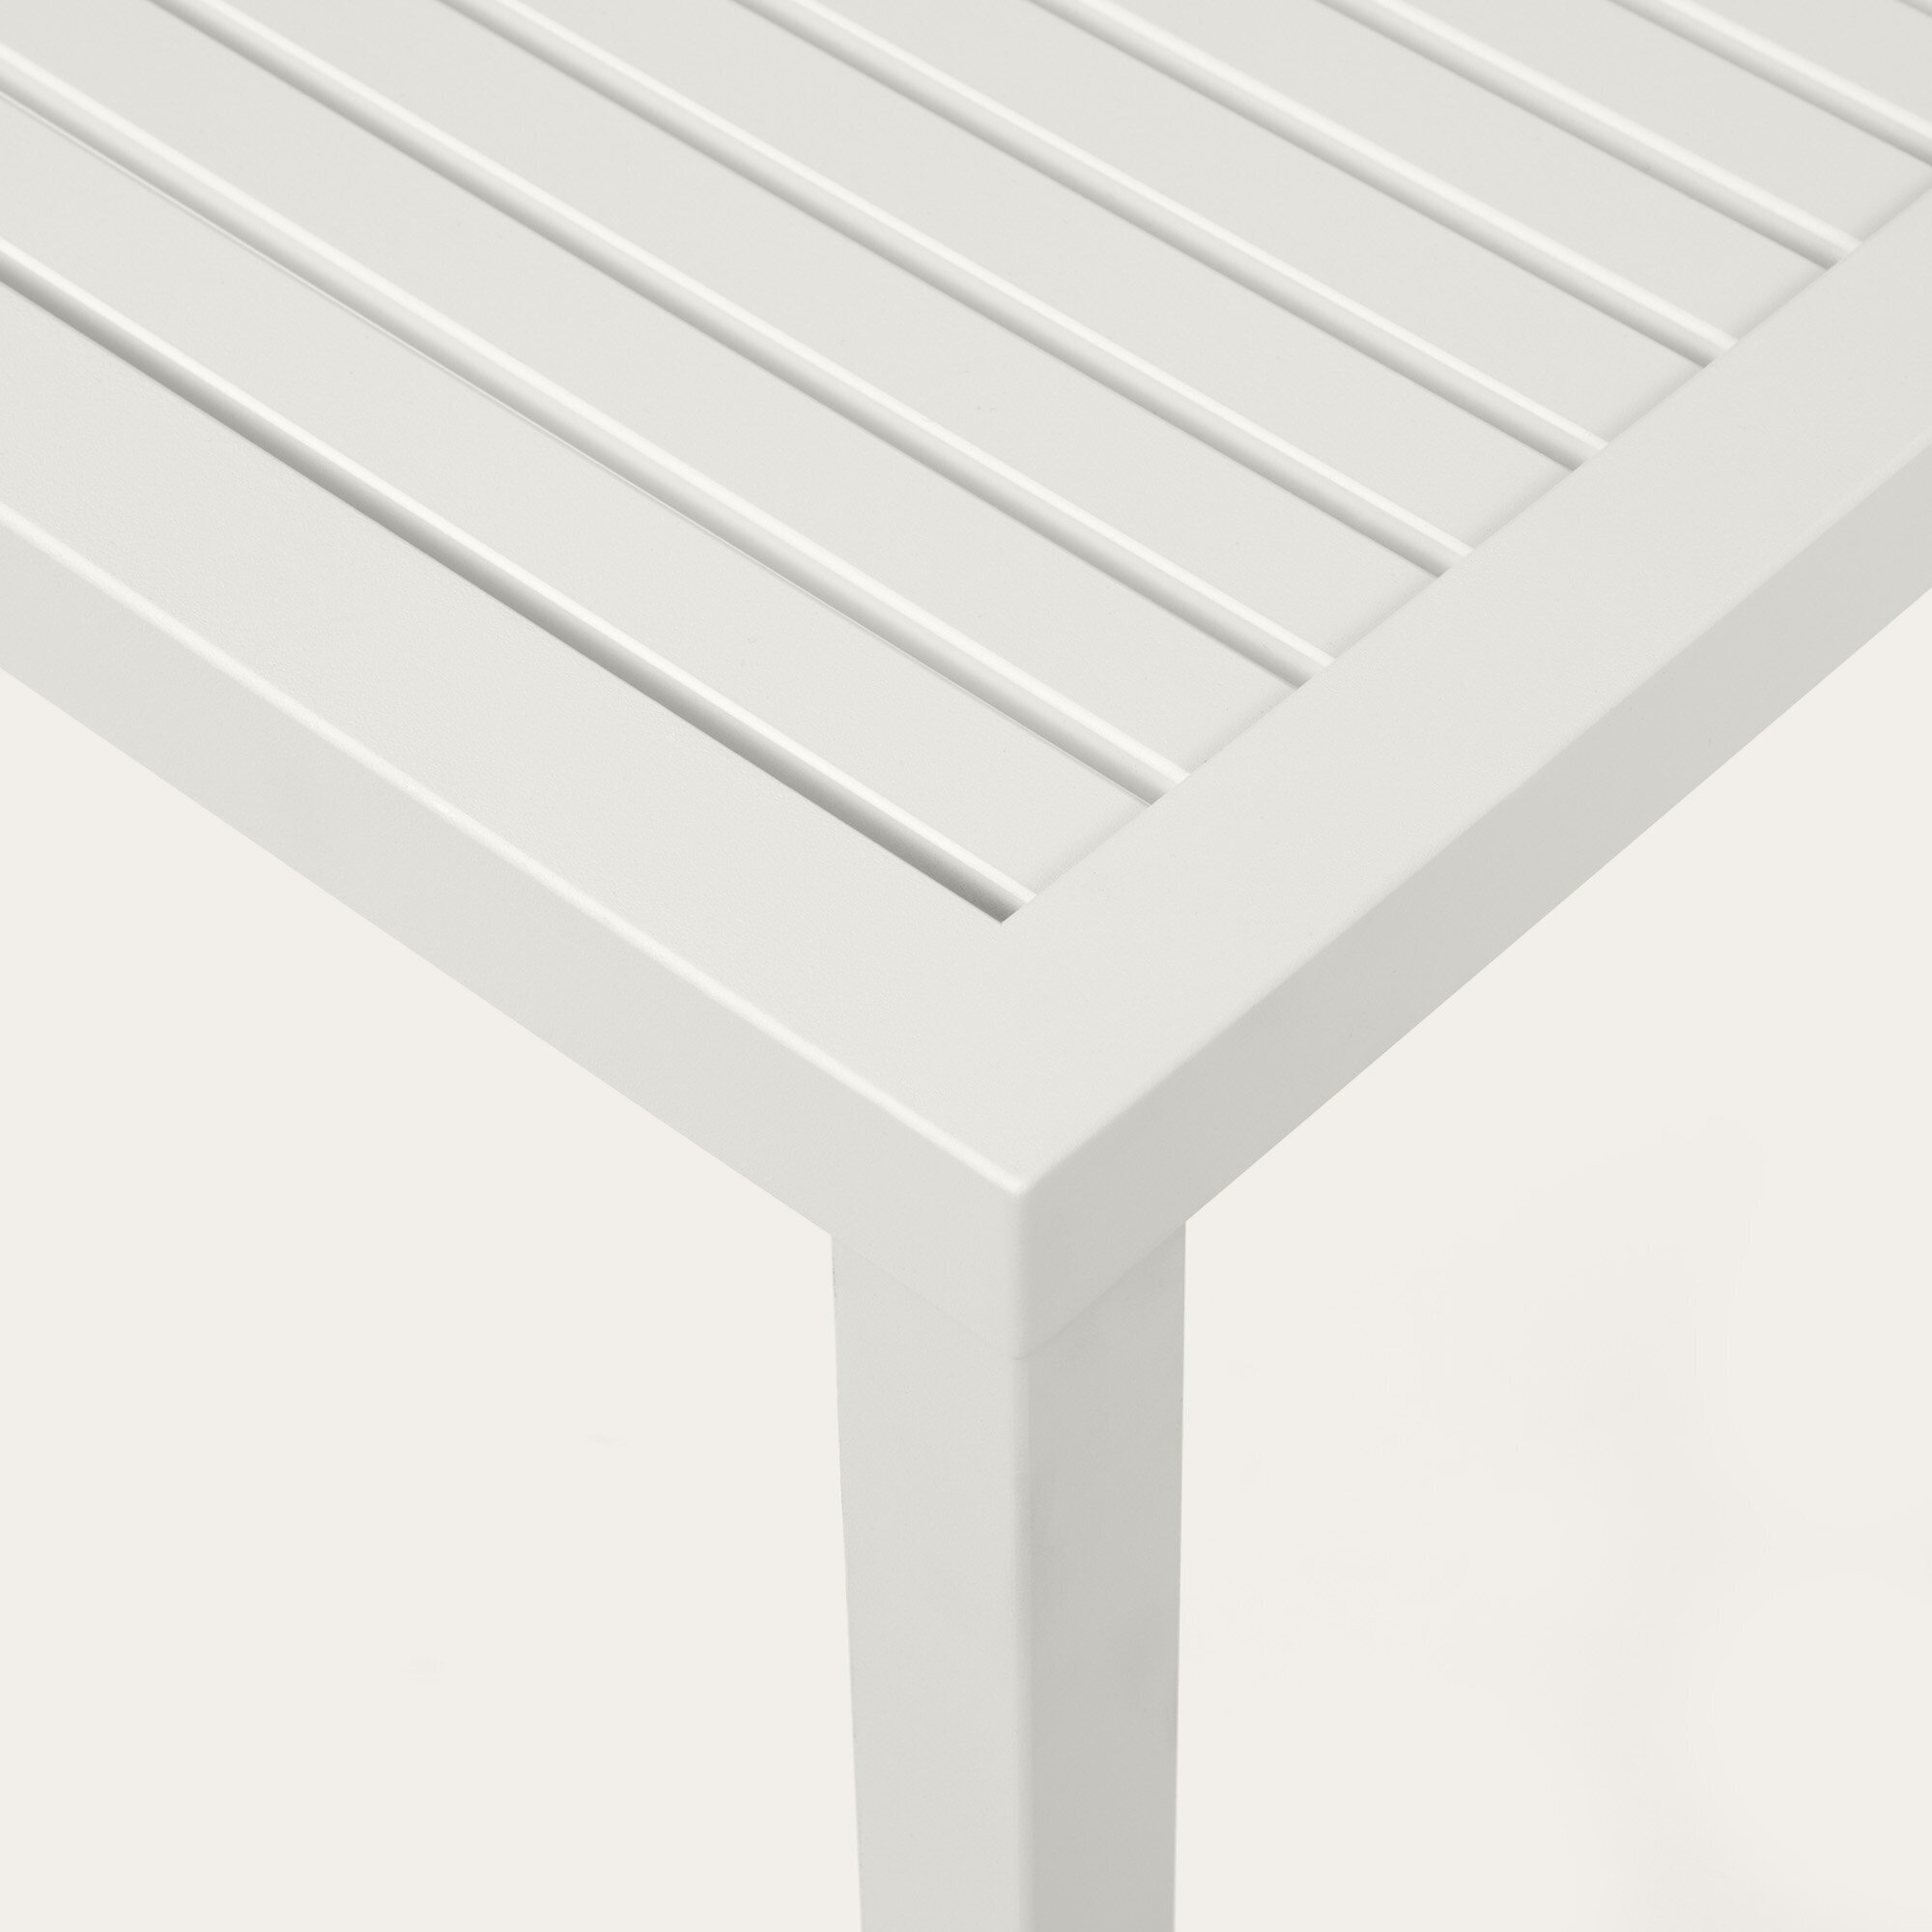 Square outdoor Design dining table | Trace Outdoor Table  White powdercoating KTL | White Powdercoat KTL | Studio HENK | 